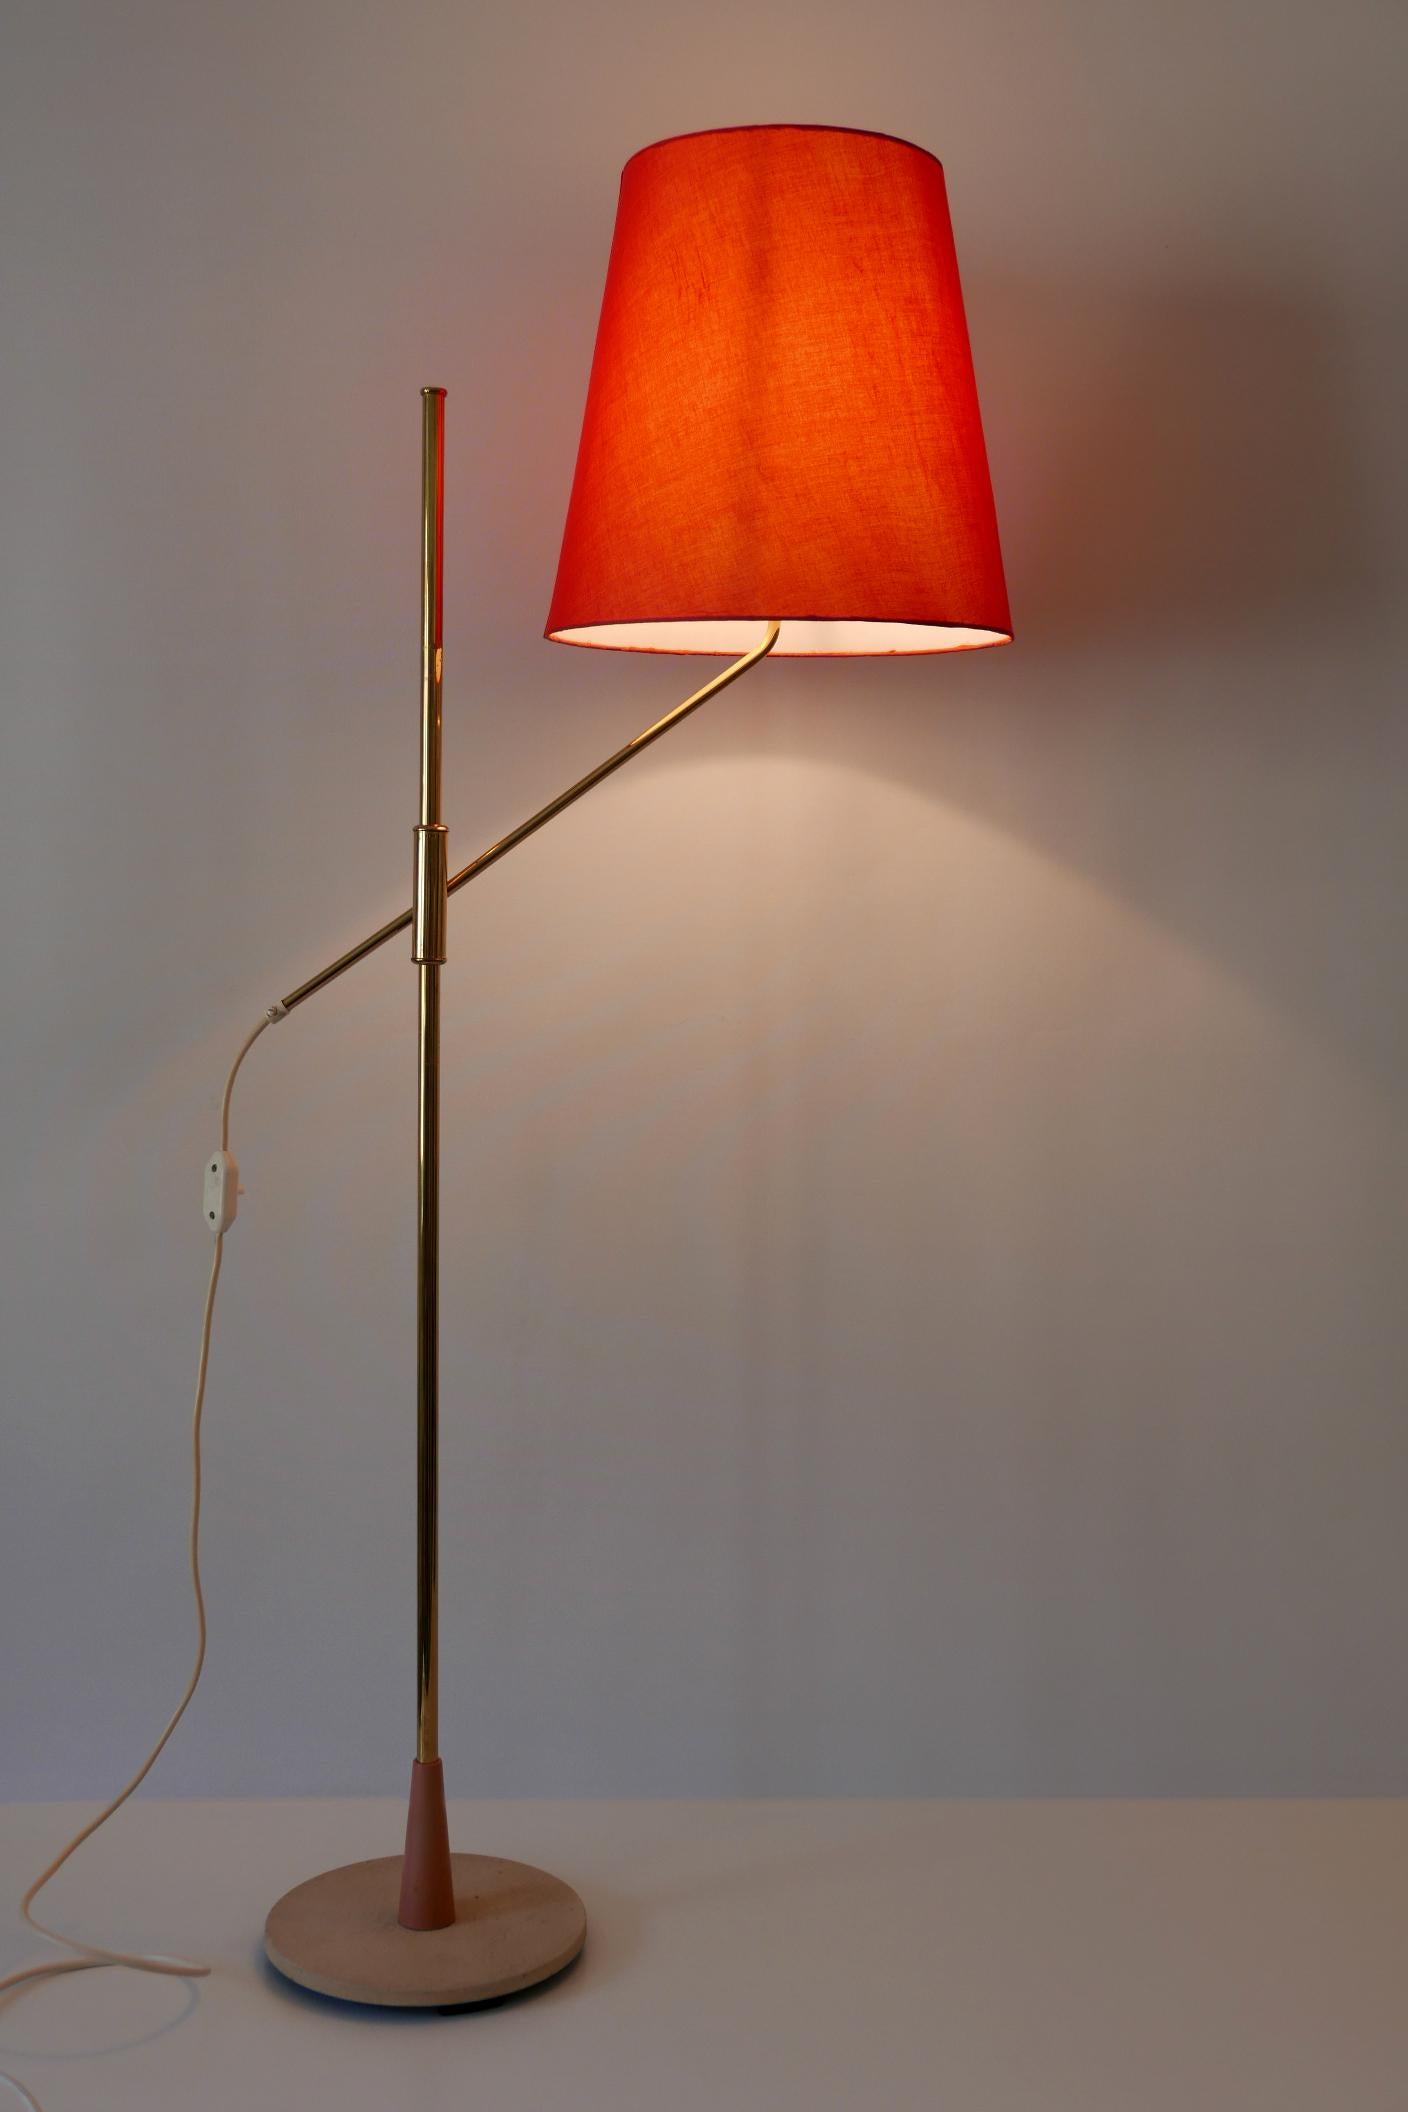 Elegant Mid-Century Modern floor lamp with adjustable height. Designed and manufactured in 1950s, Germany.

Attention: The lamp comes without lamp shade and in disassembled condition for economy international shipping.

Executed in brass, the lamp